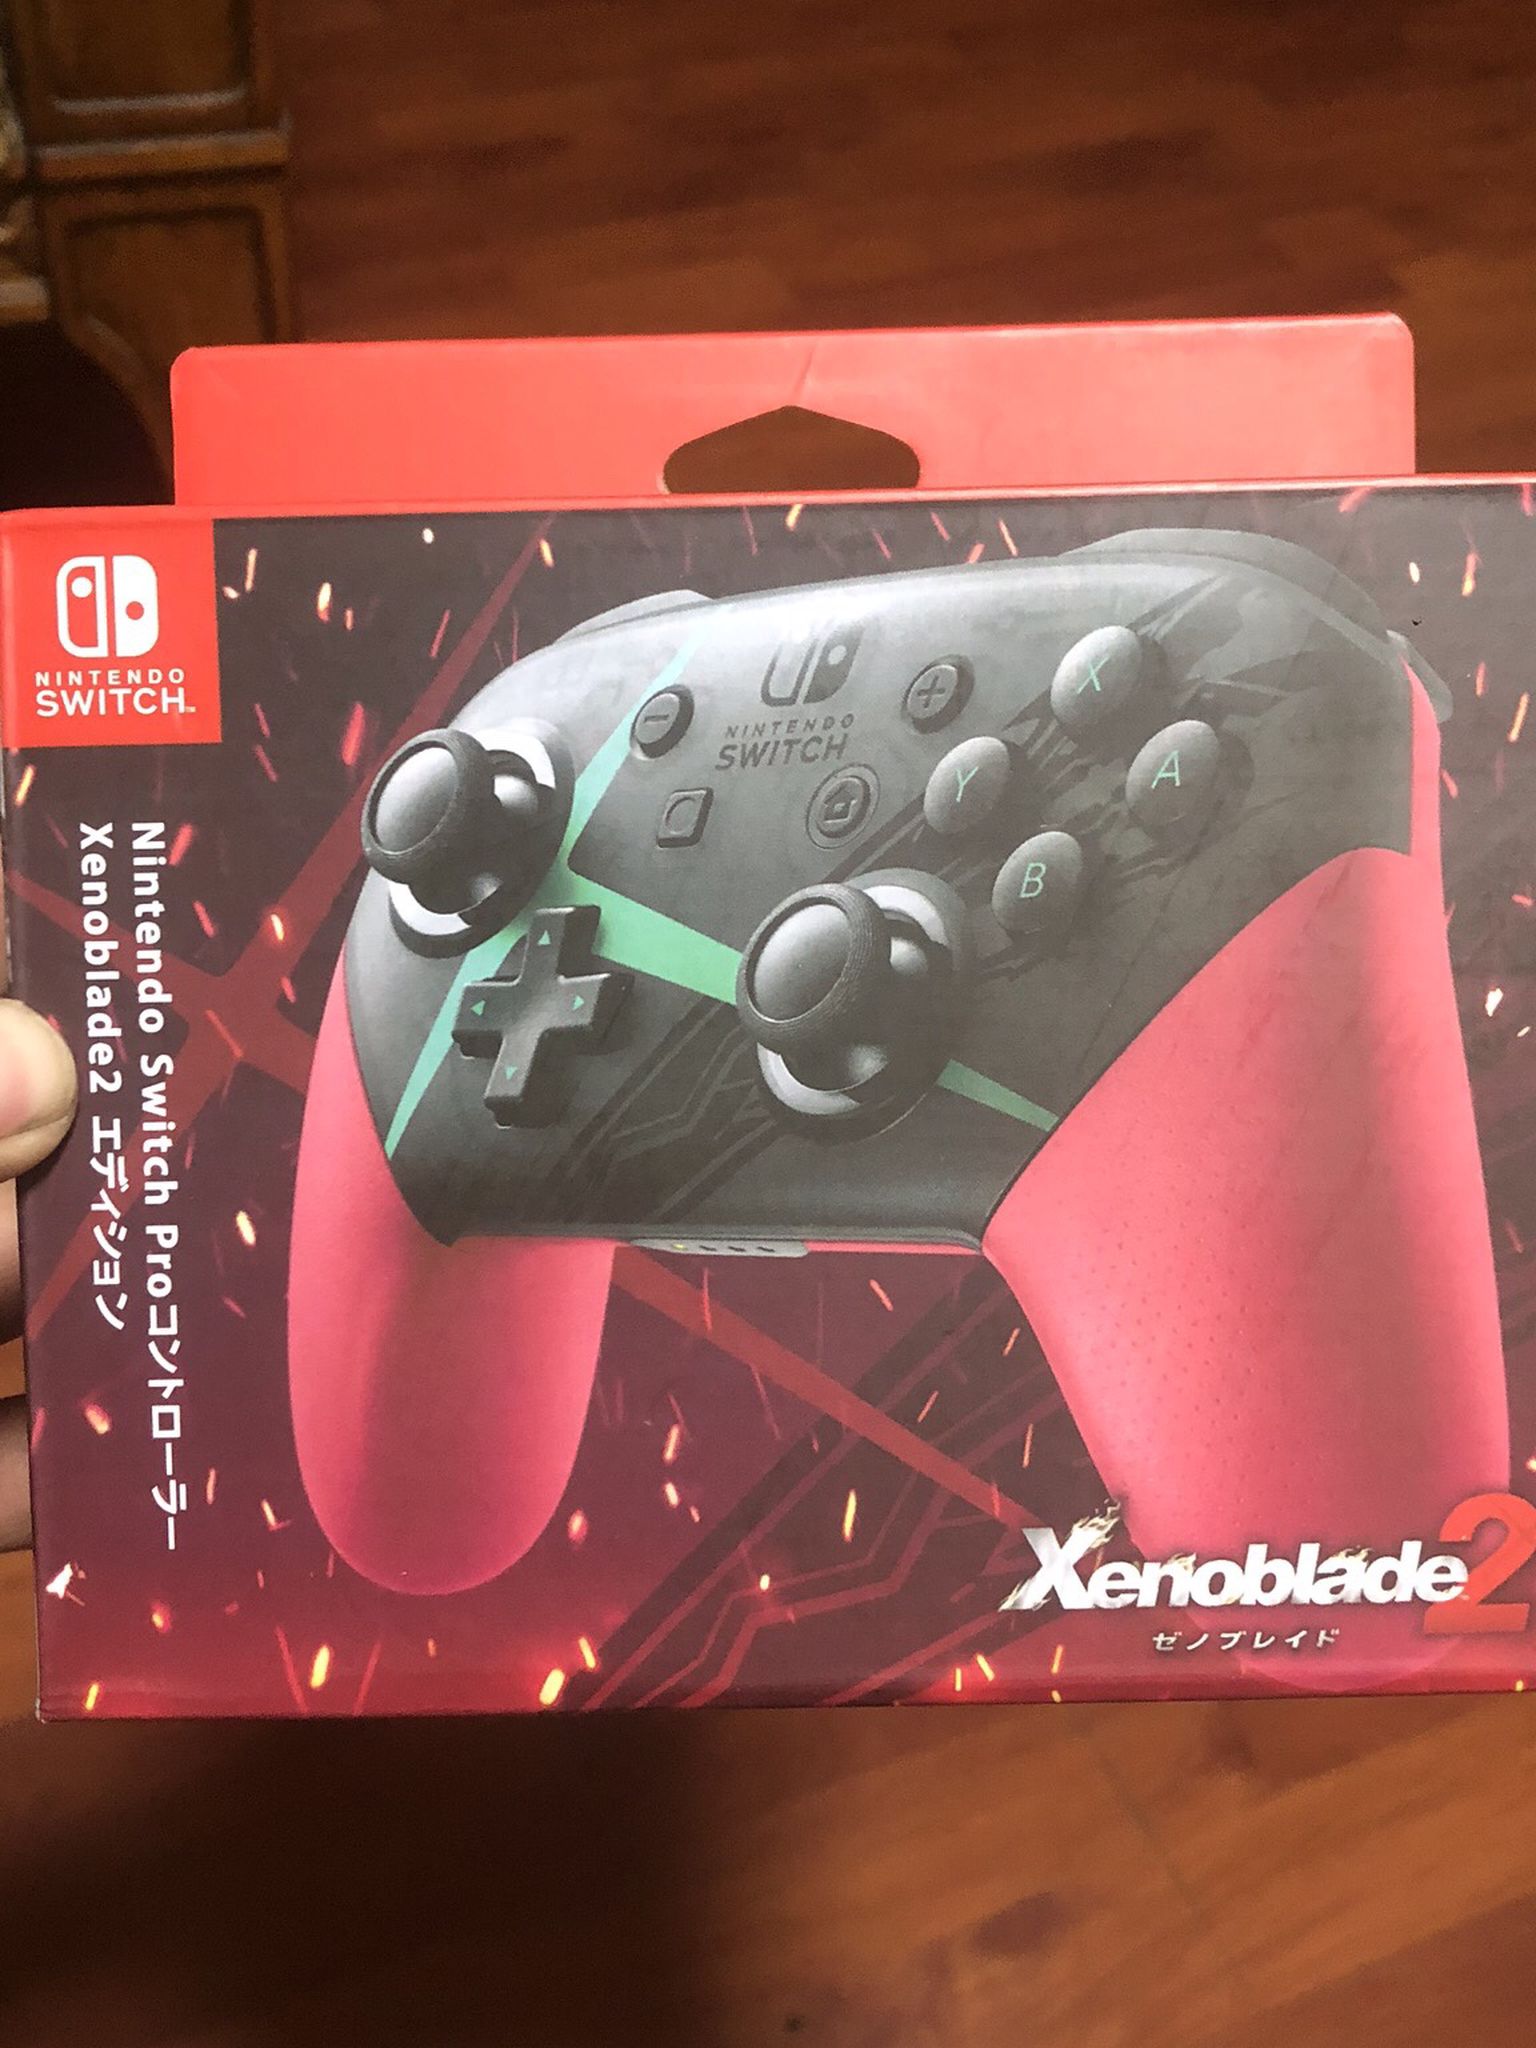 Higgins Rang efterligne Brand New Nintendo Switch Pro Controller Xenoblade Chronicles 2 Limited  Edition for Sale in Long Beach, CA - OfferUp